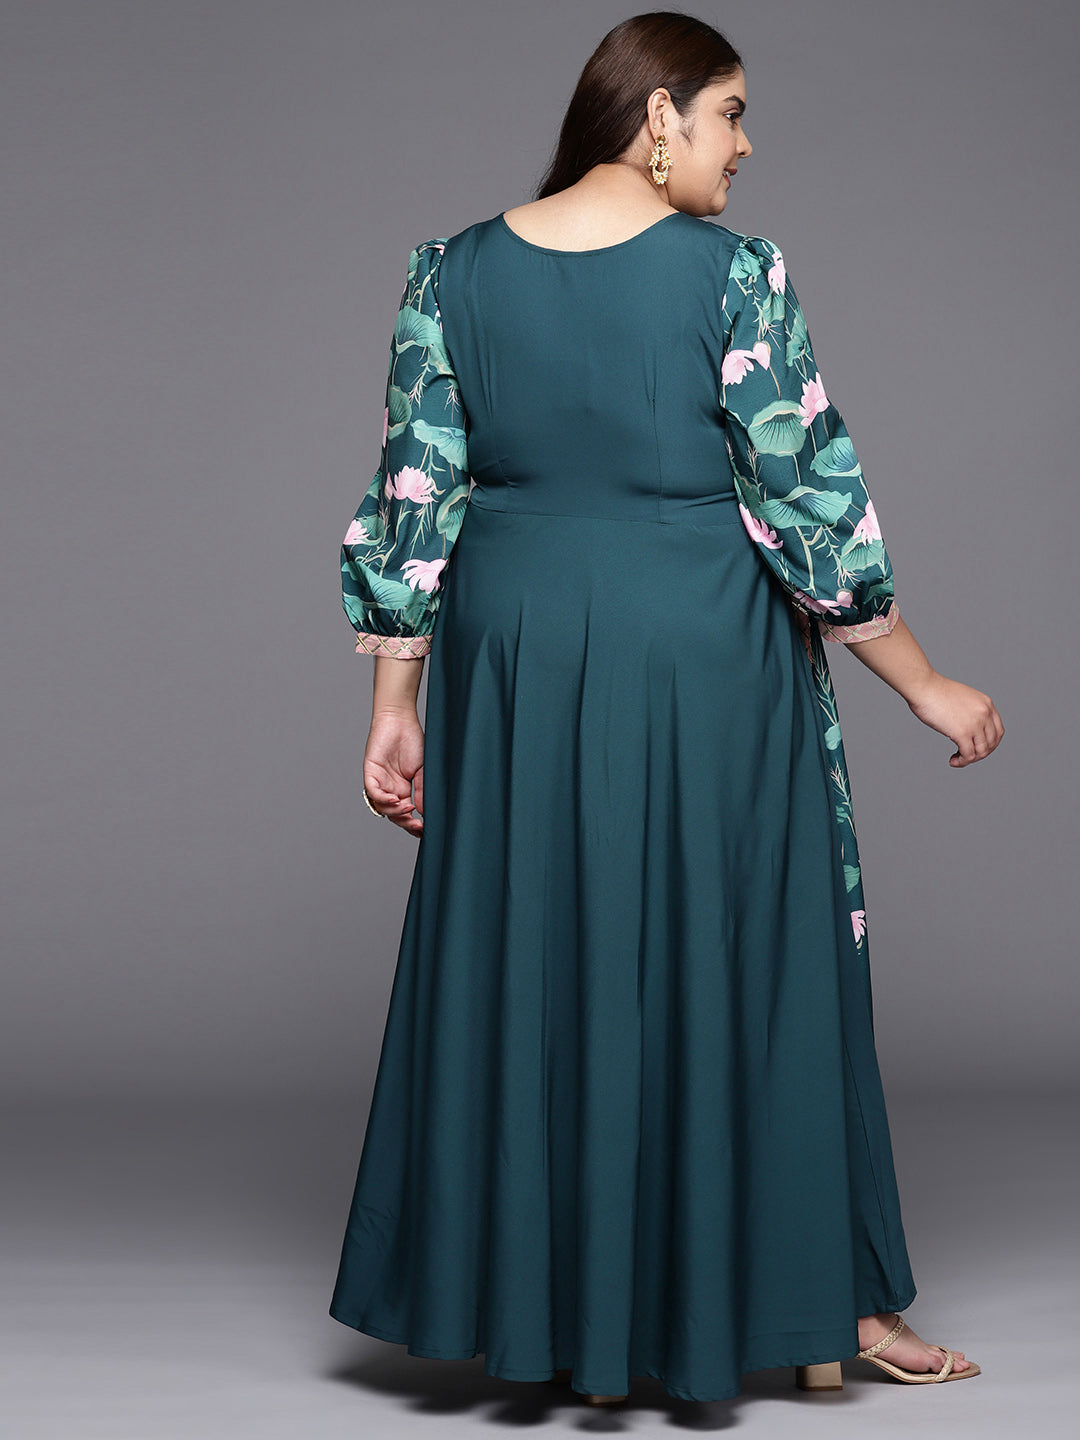 Green Floral Printed Plus Size Maxi Ethnic Dress